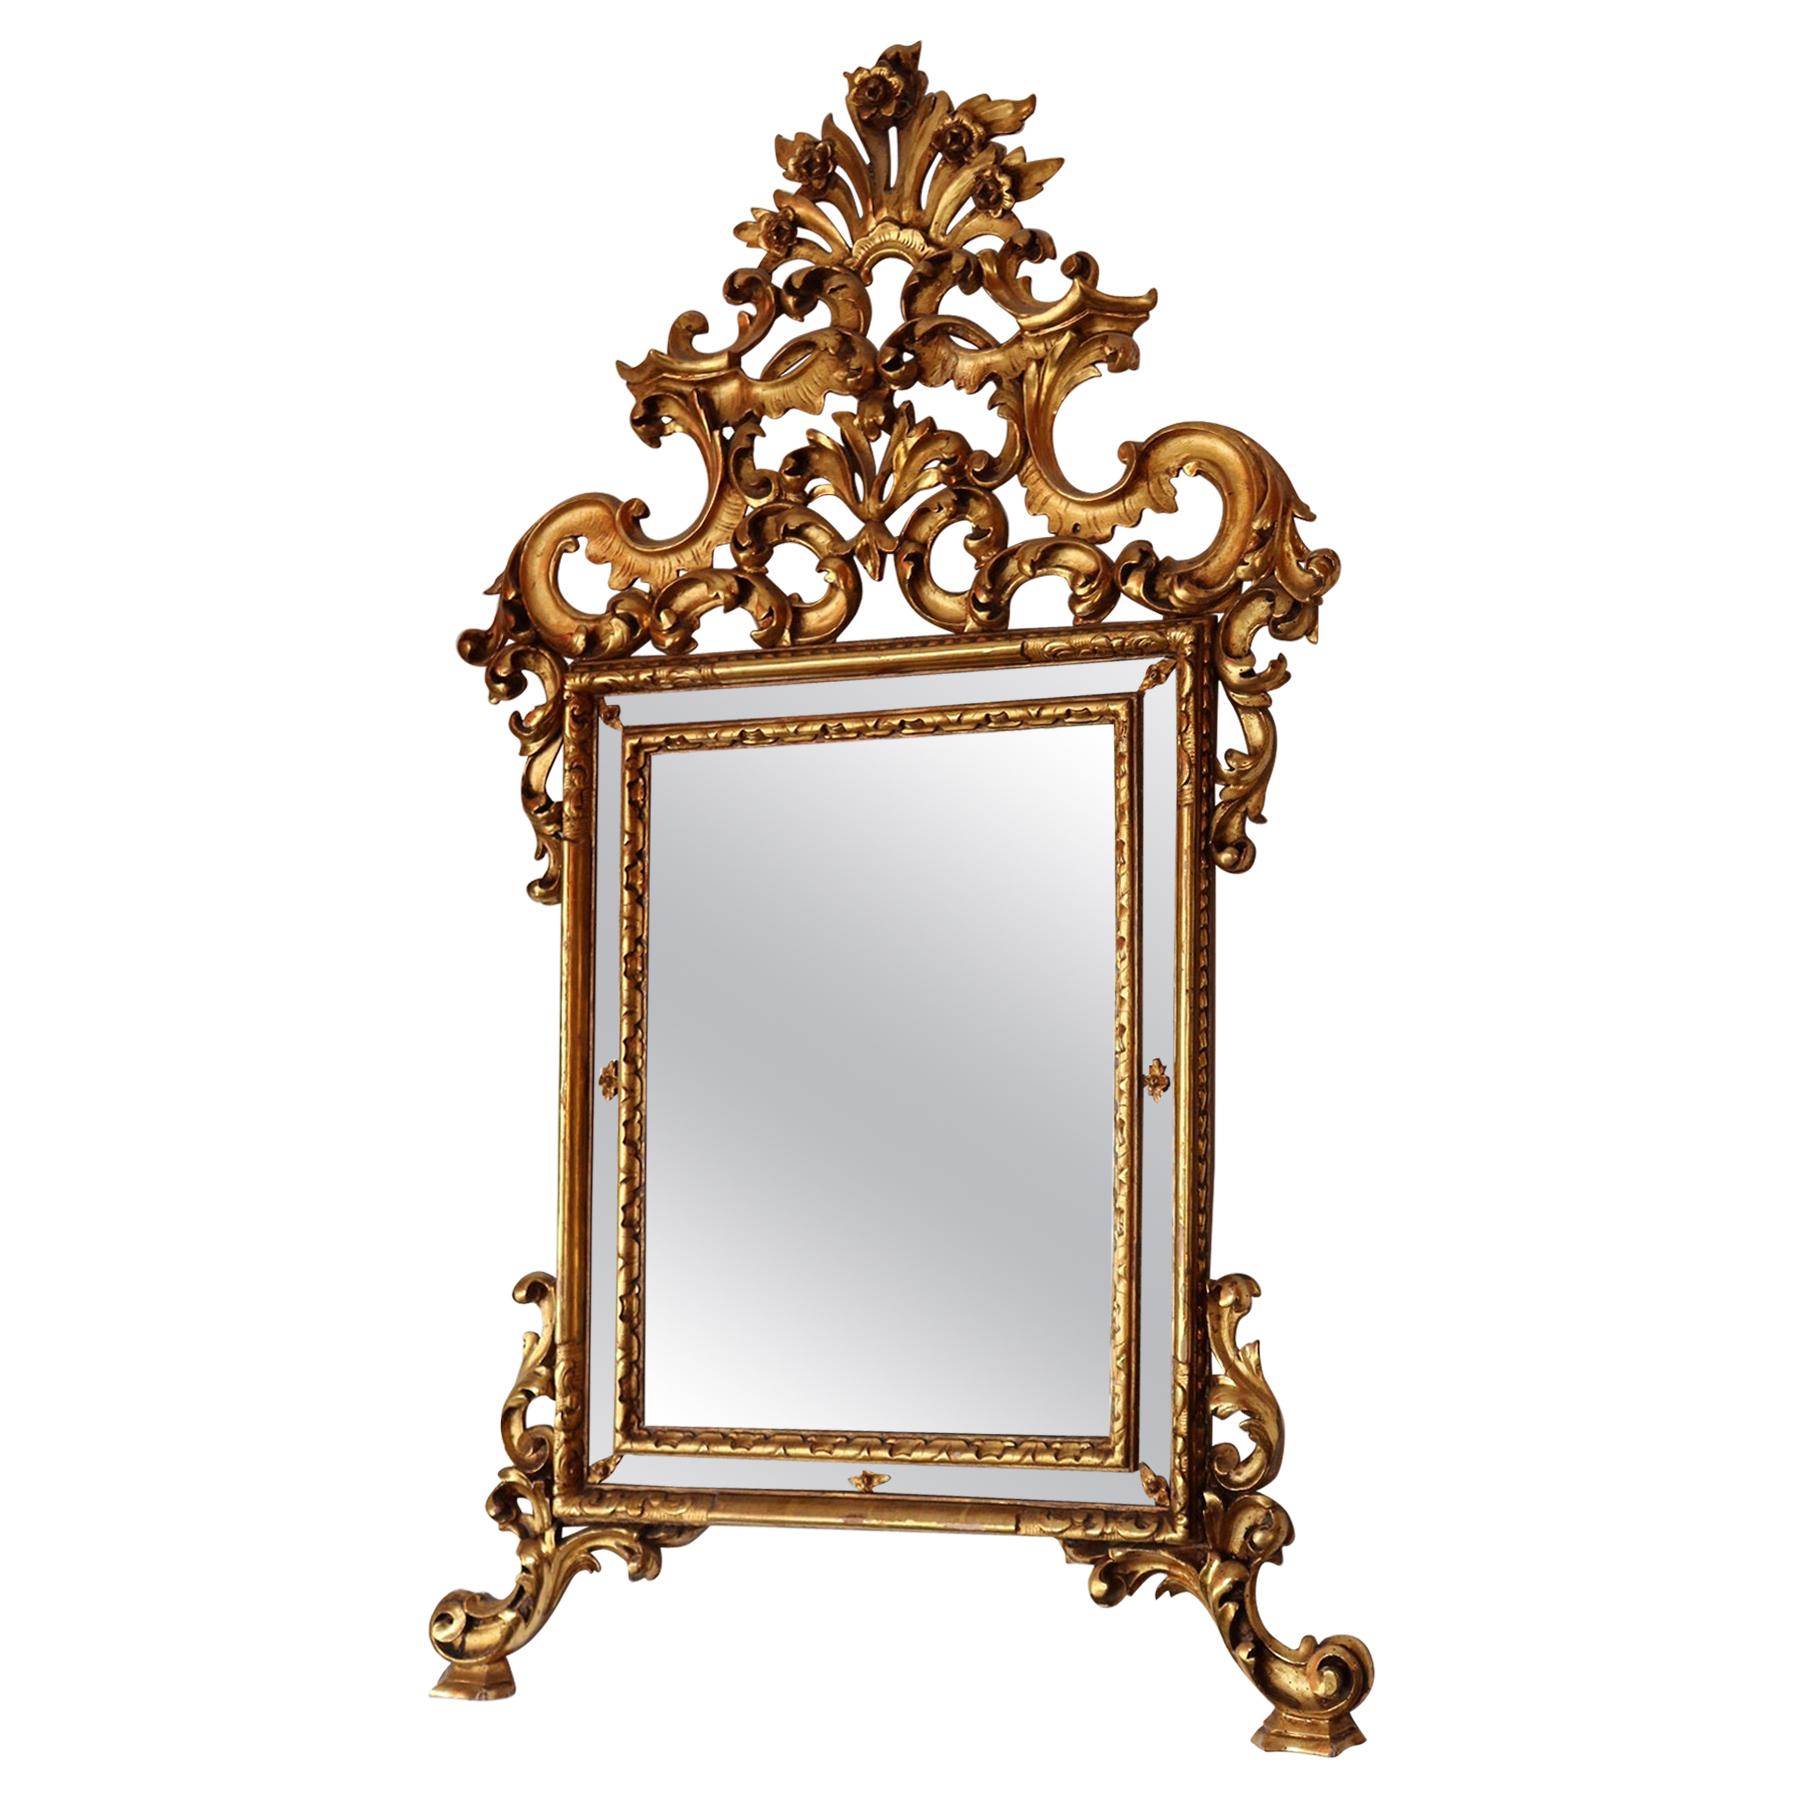 Early 20th Century Italian Louis XV Style Carved and Gilded Wood Wall Mirror